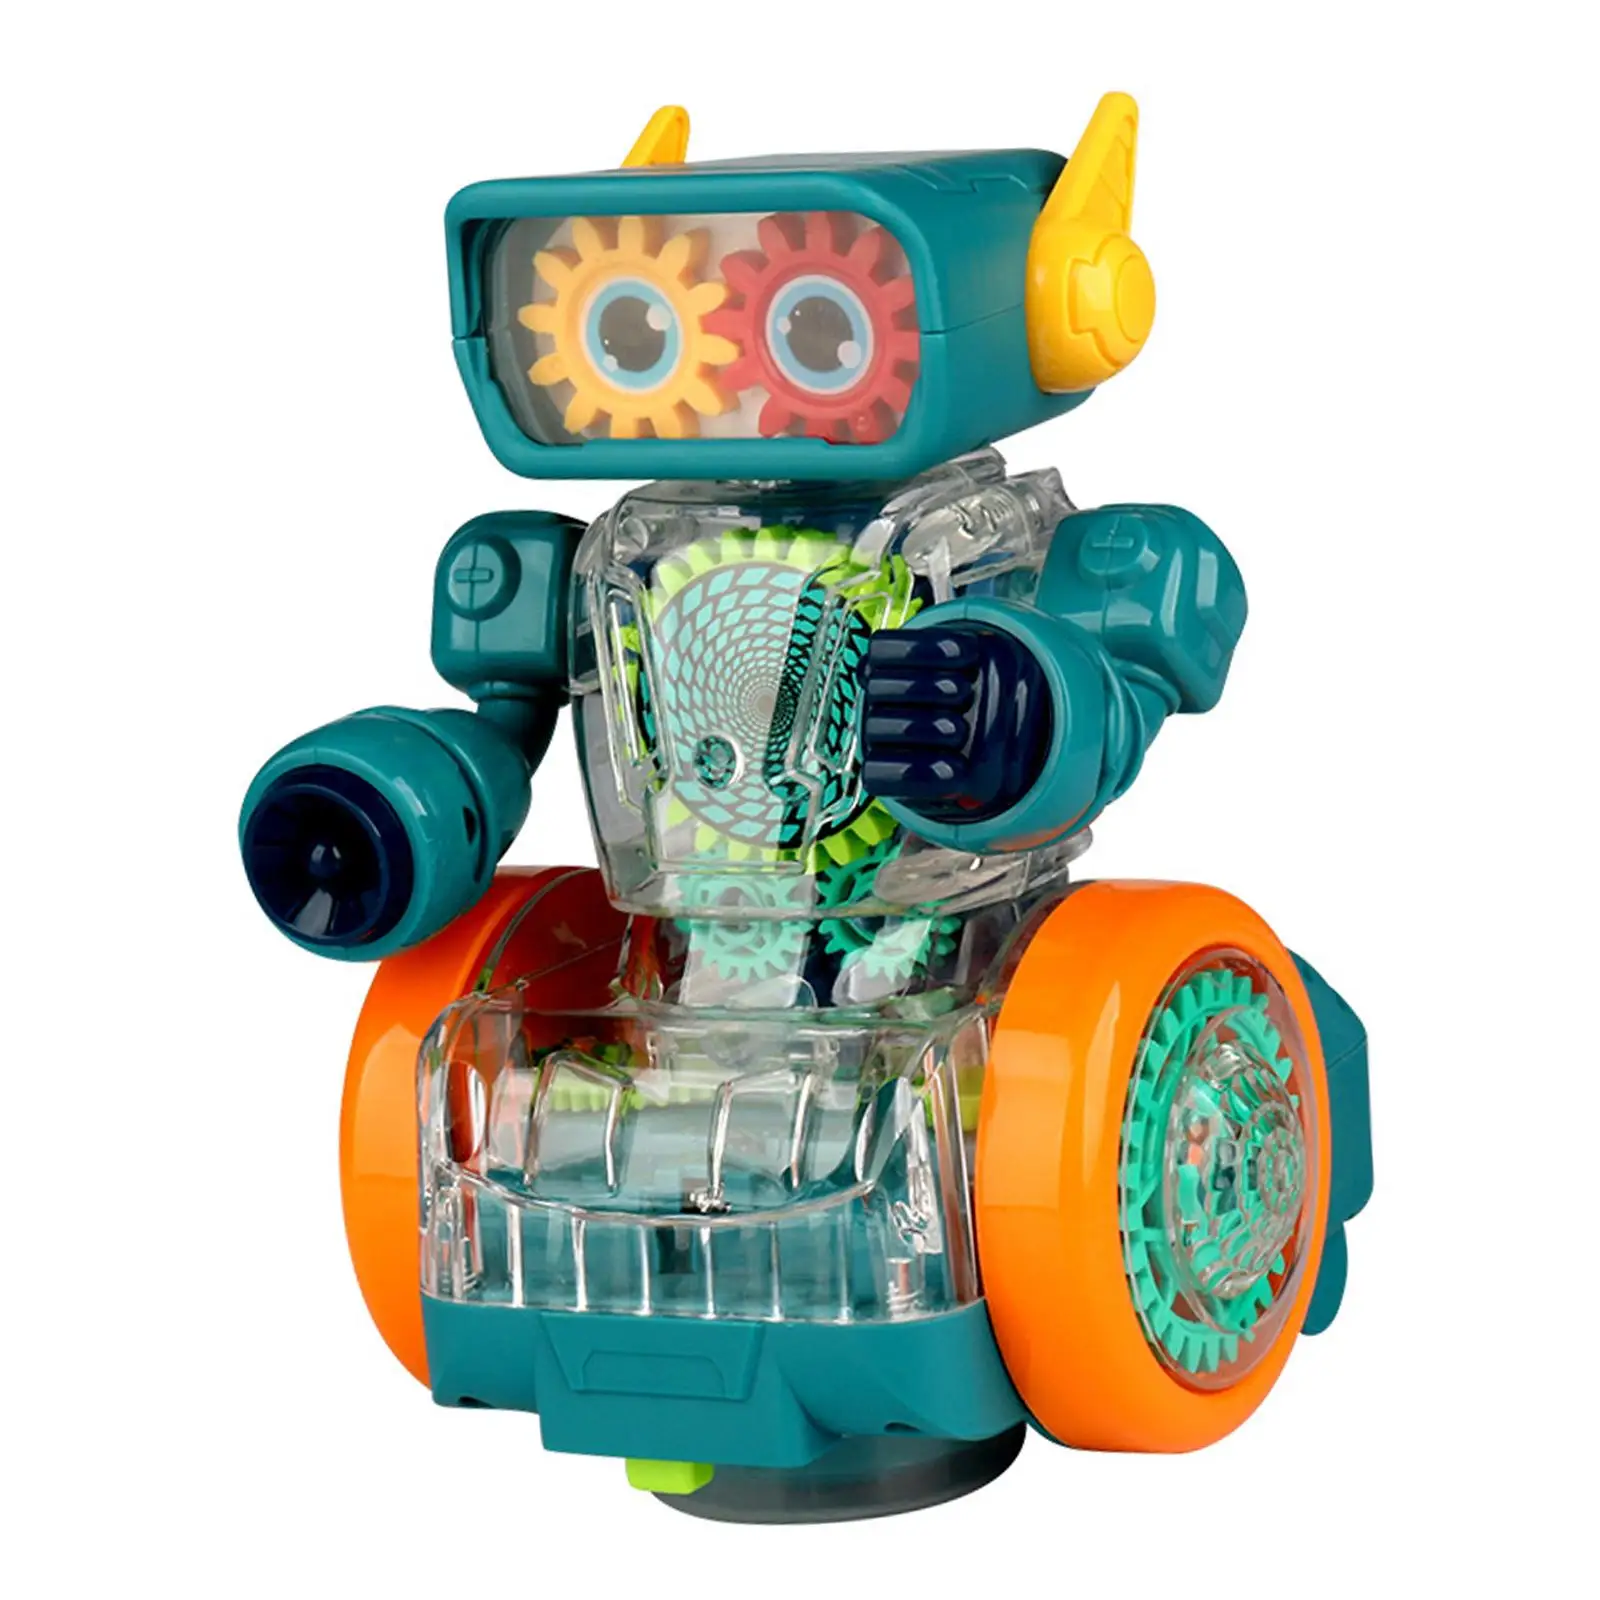 Electric Mechanical Gear Robot Toy with Music Interactive Toys Developmental Toys Gear Toy for Girls Kids Holiday Gifts